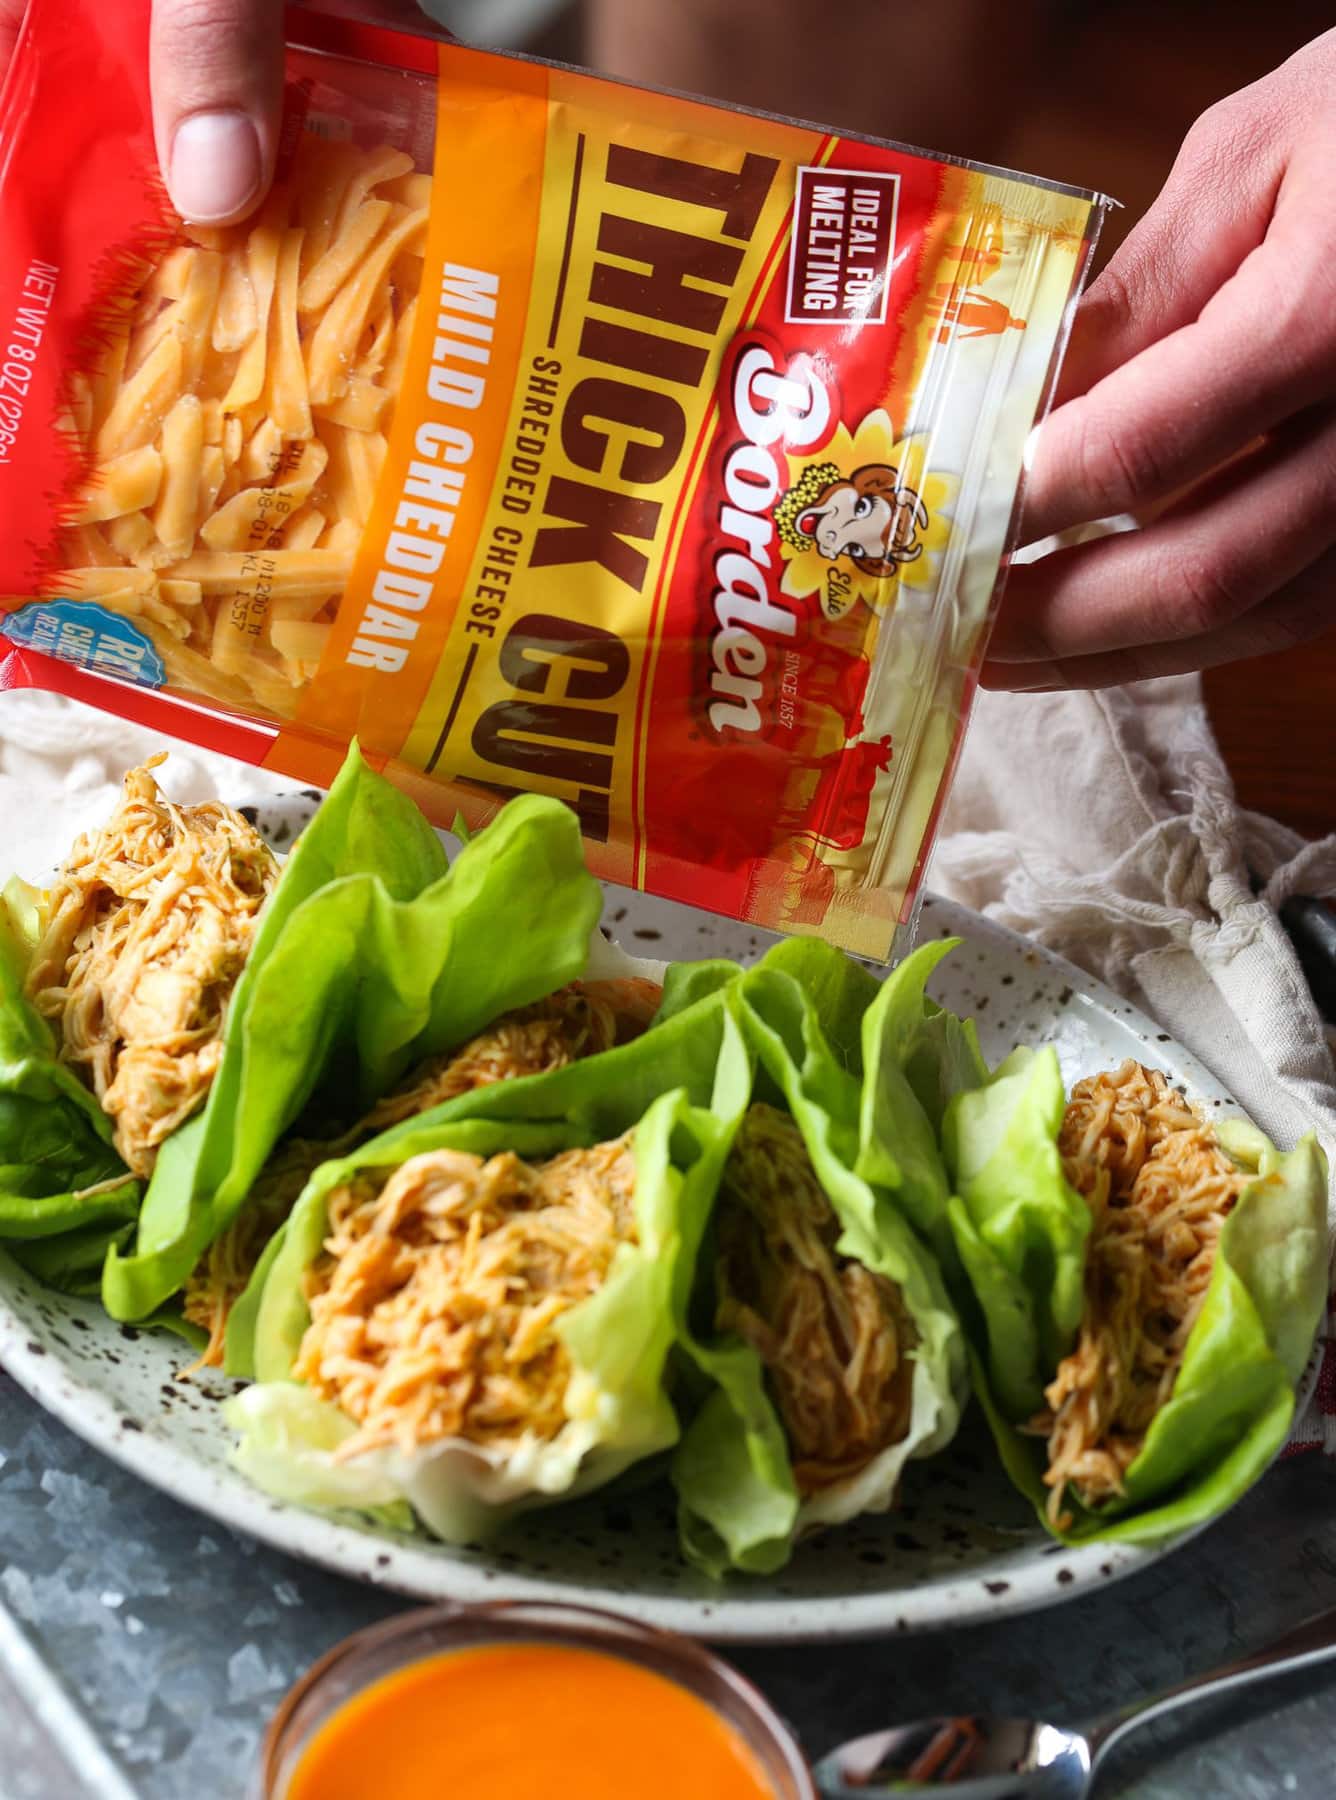 Topping lettuce wraps with cheese